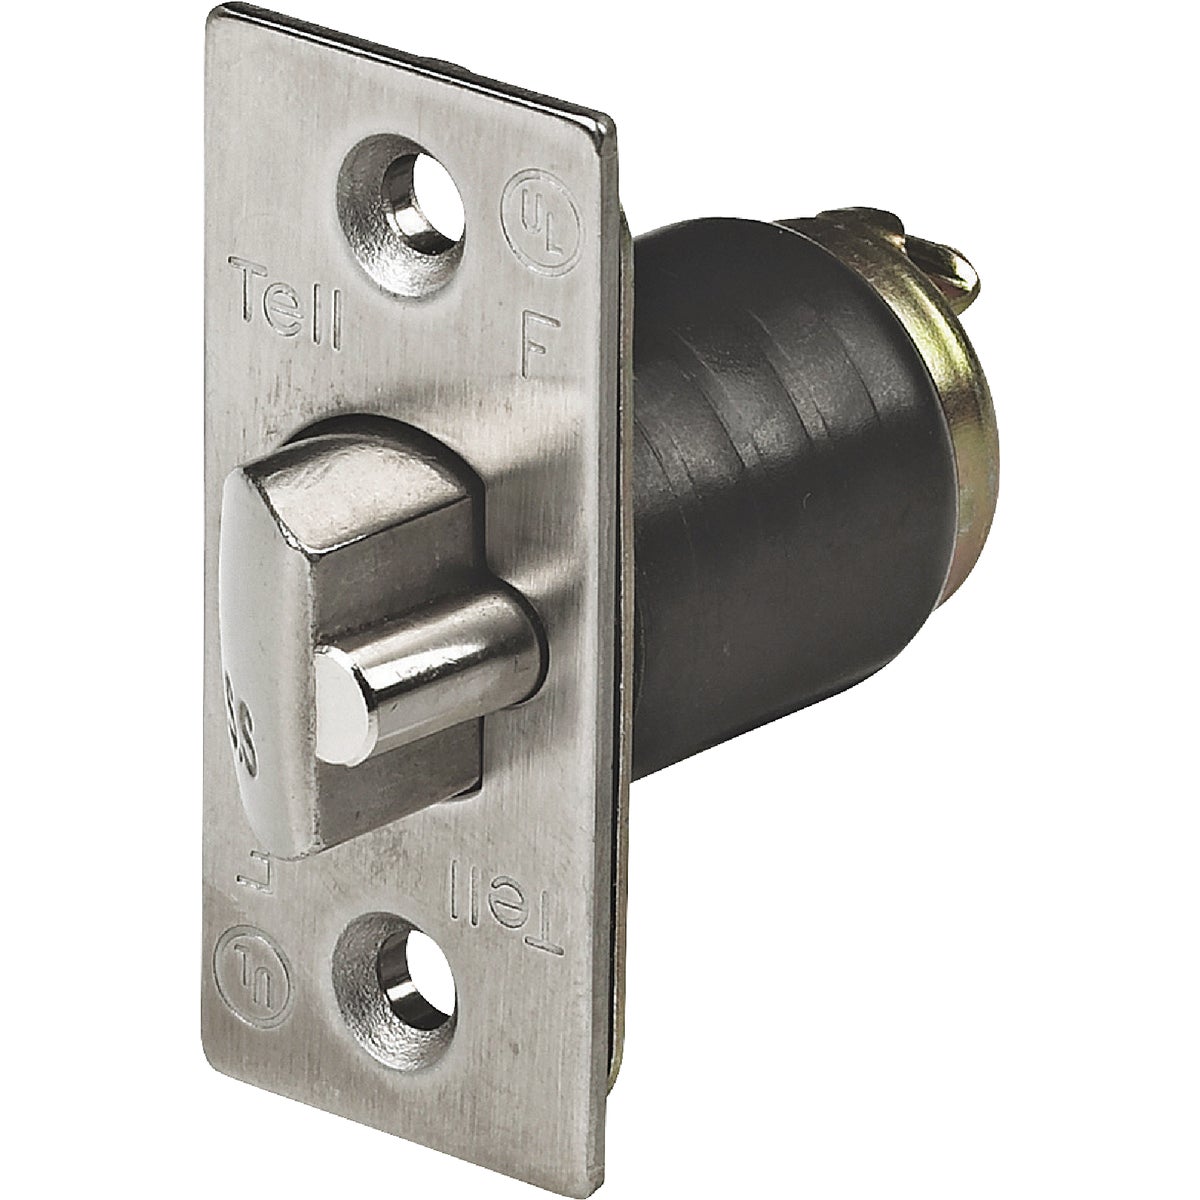 2-3/4 SV GUARDED LATCH